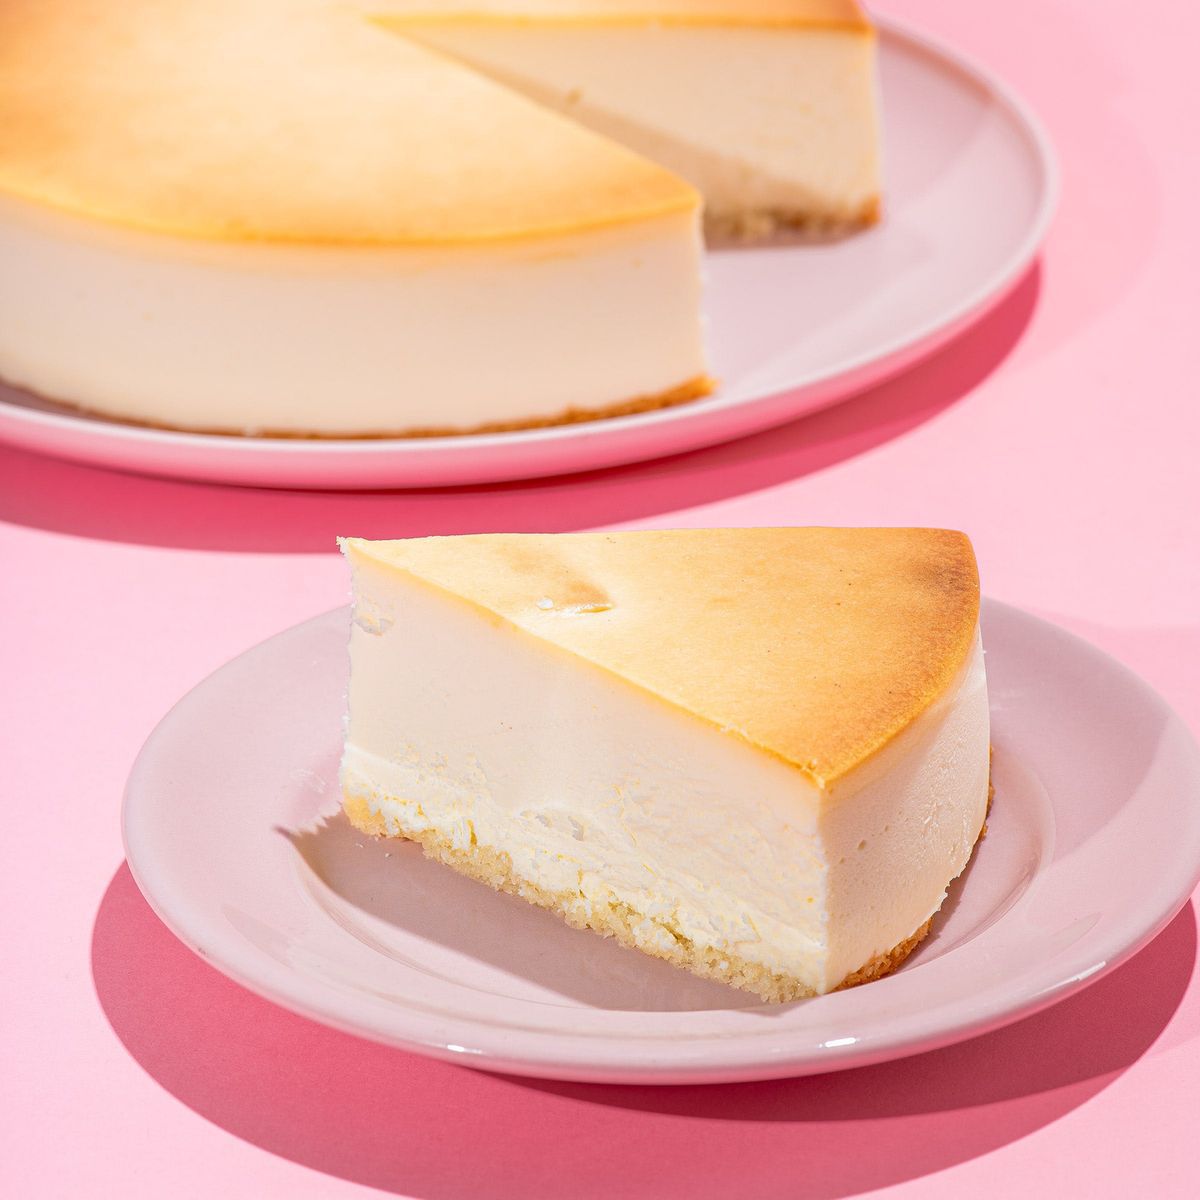 Slice of cheesecake on a plate